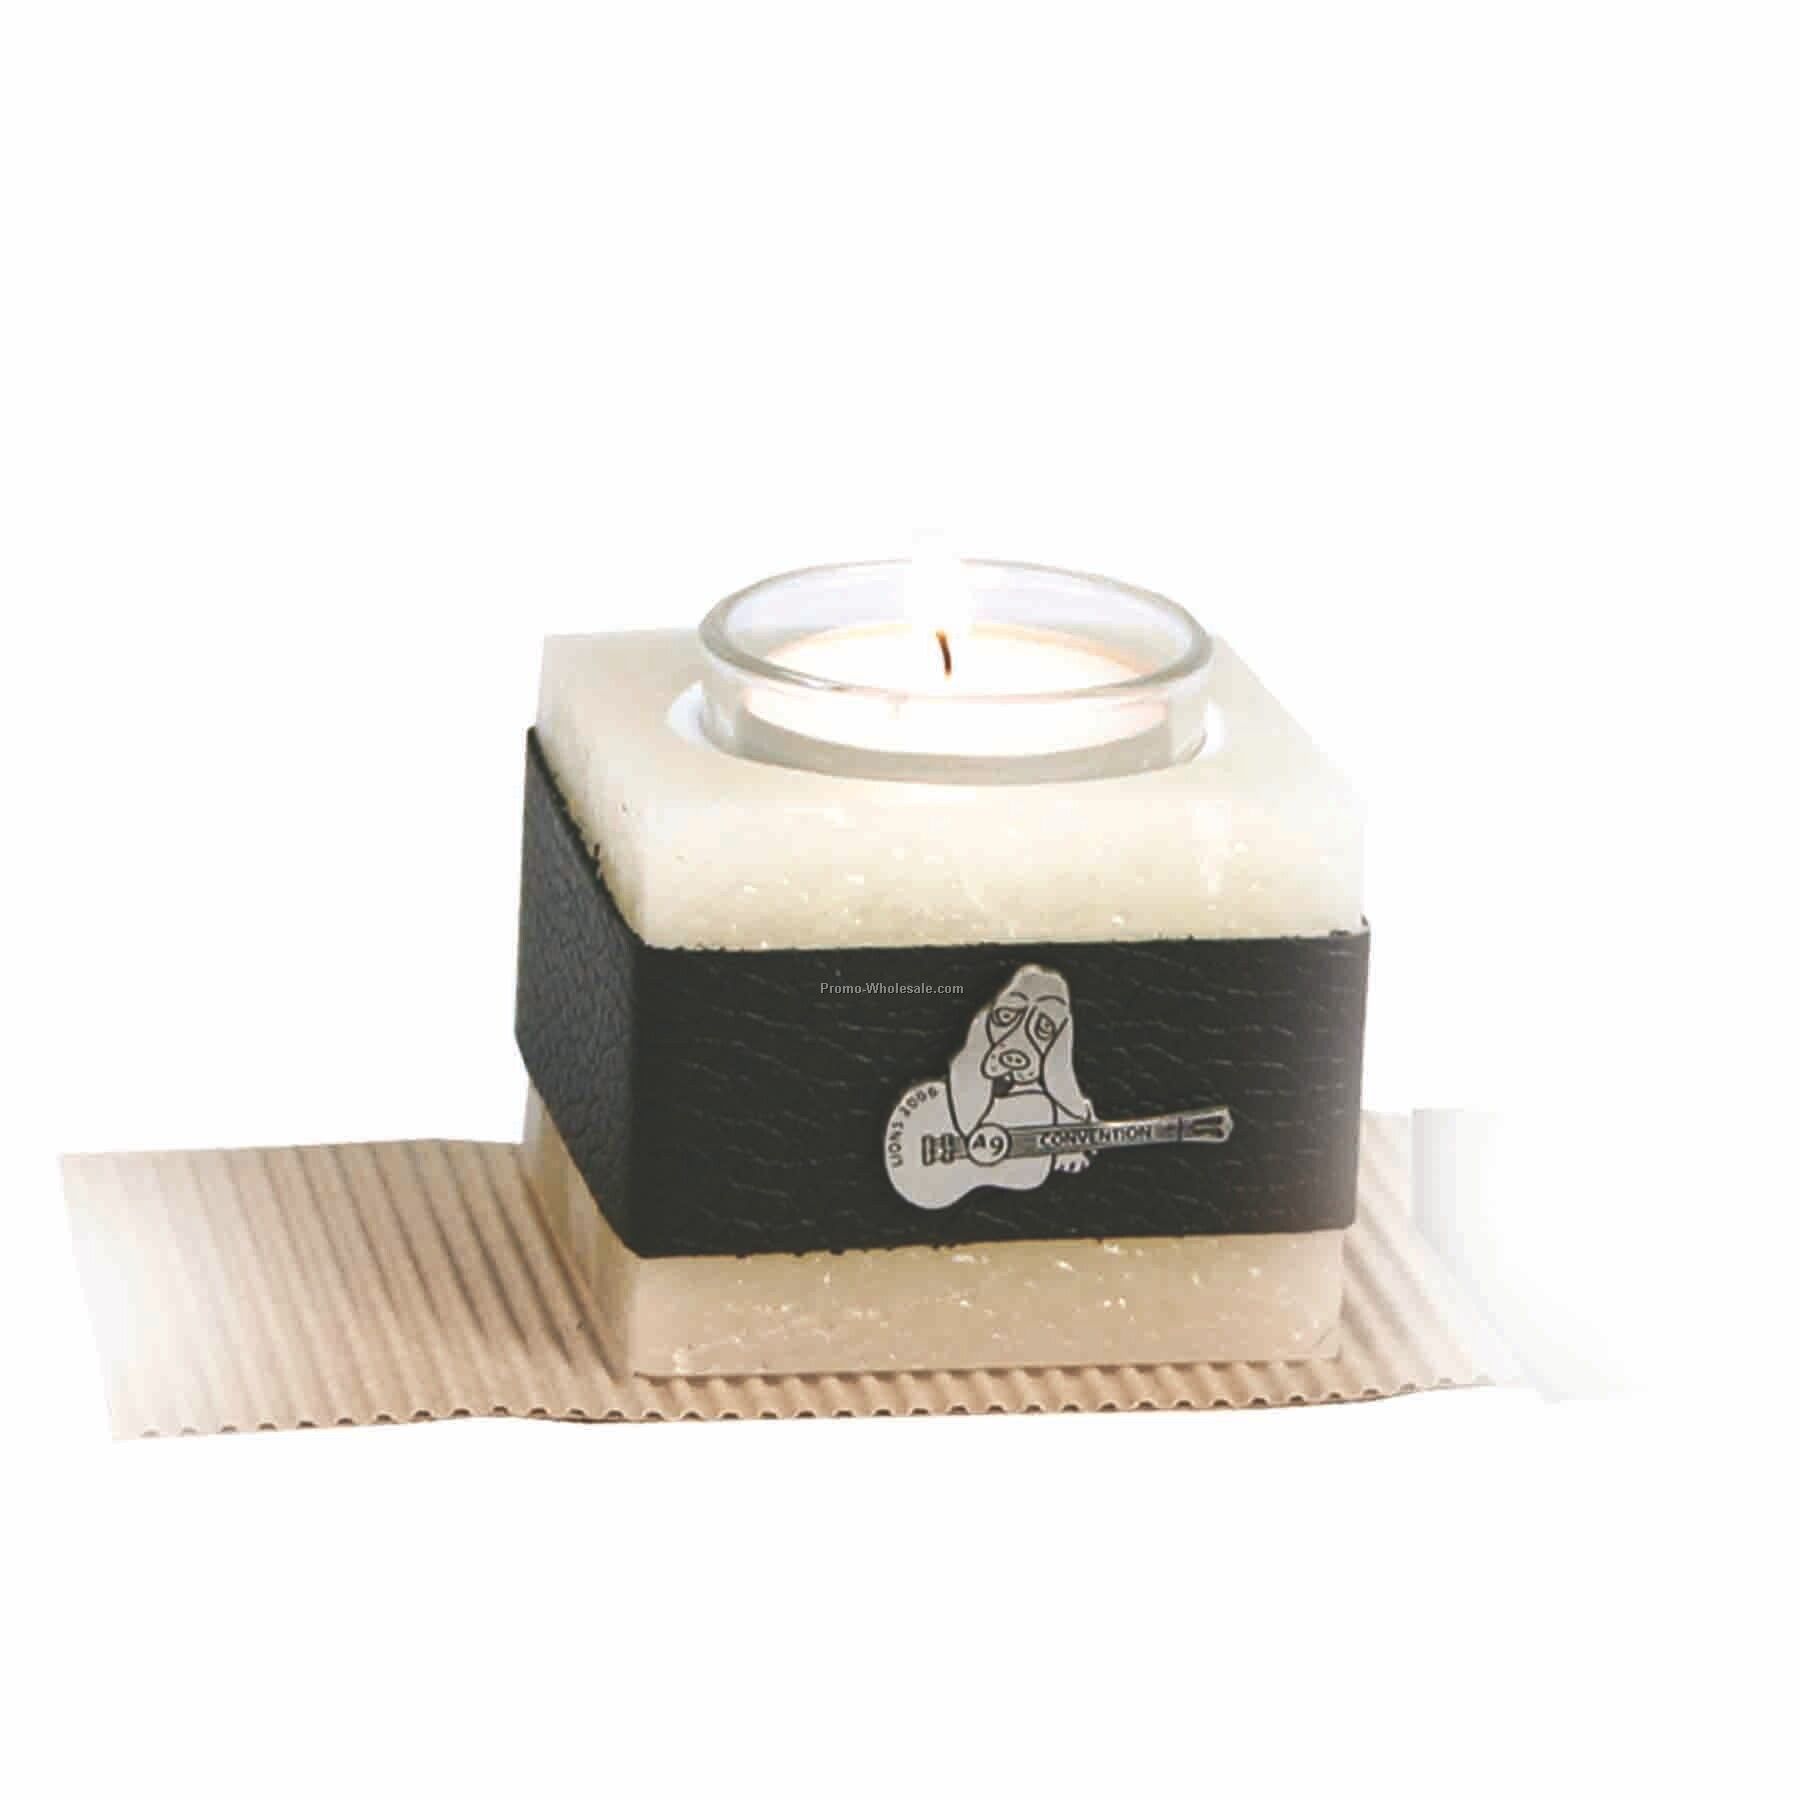 Single Candle, Leather Band Replaceable Tea Lights (Pewter Emblem)